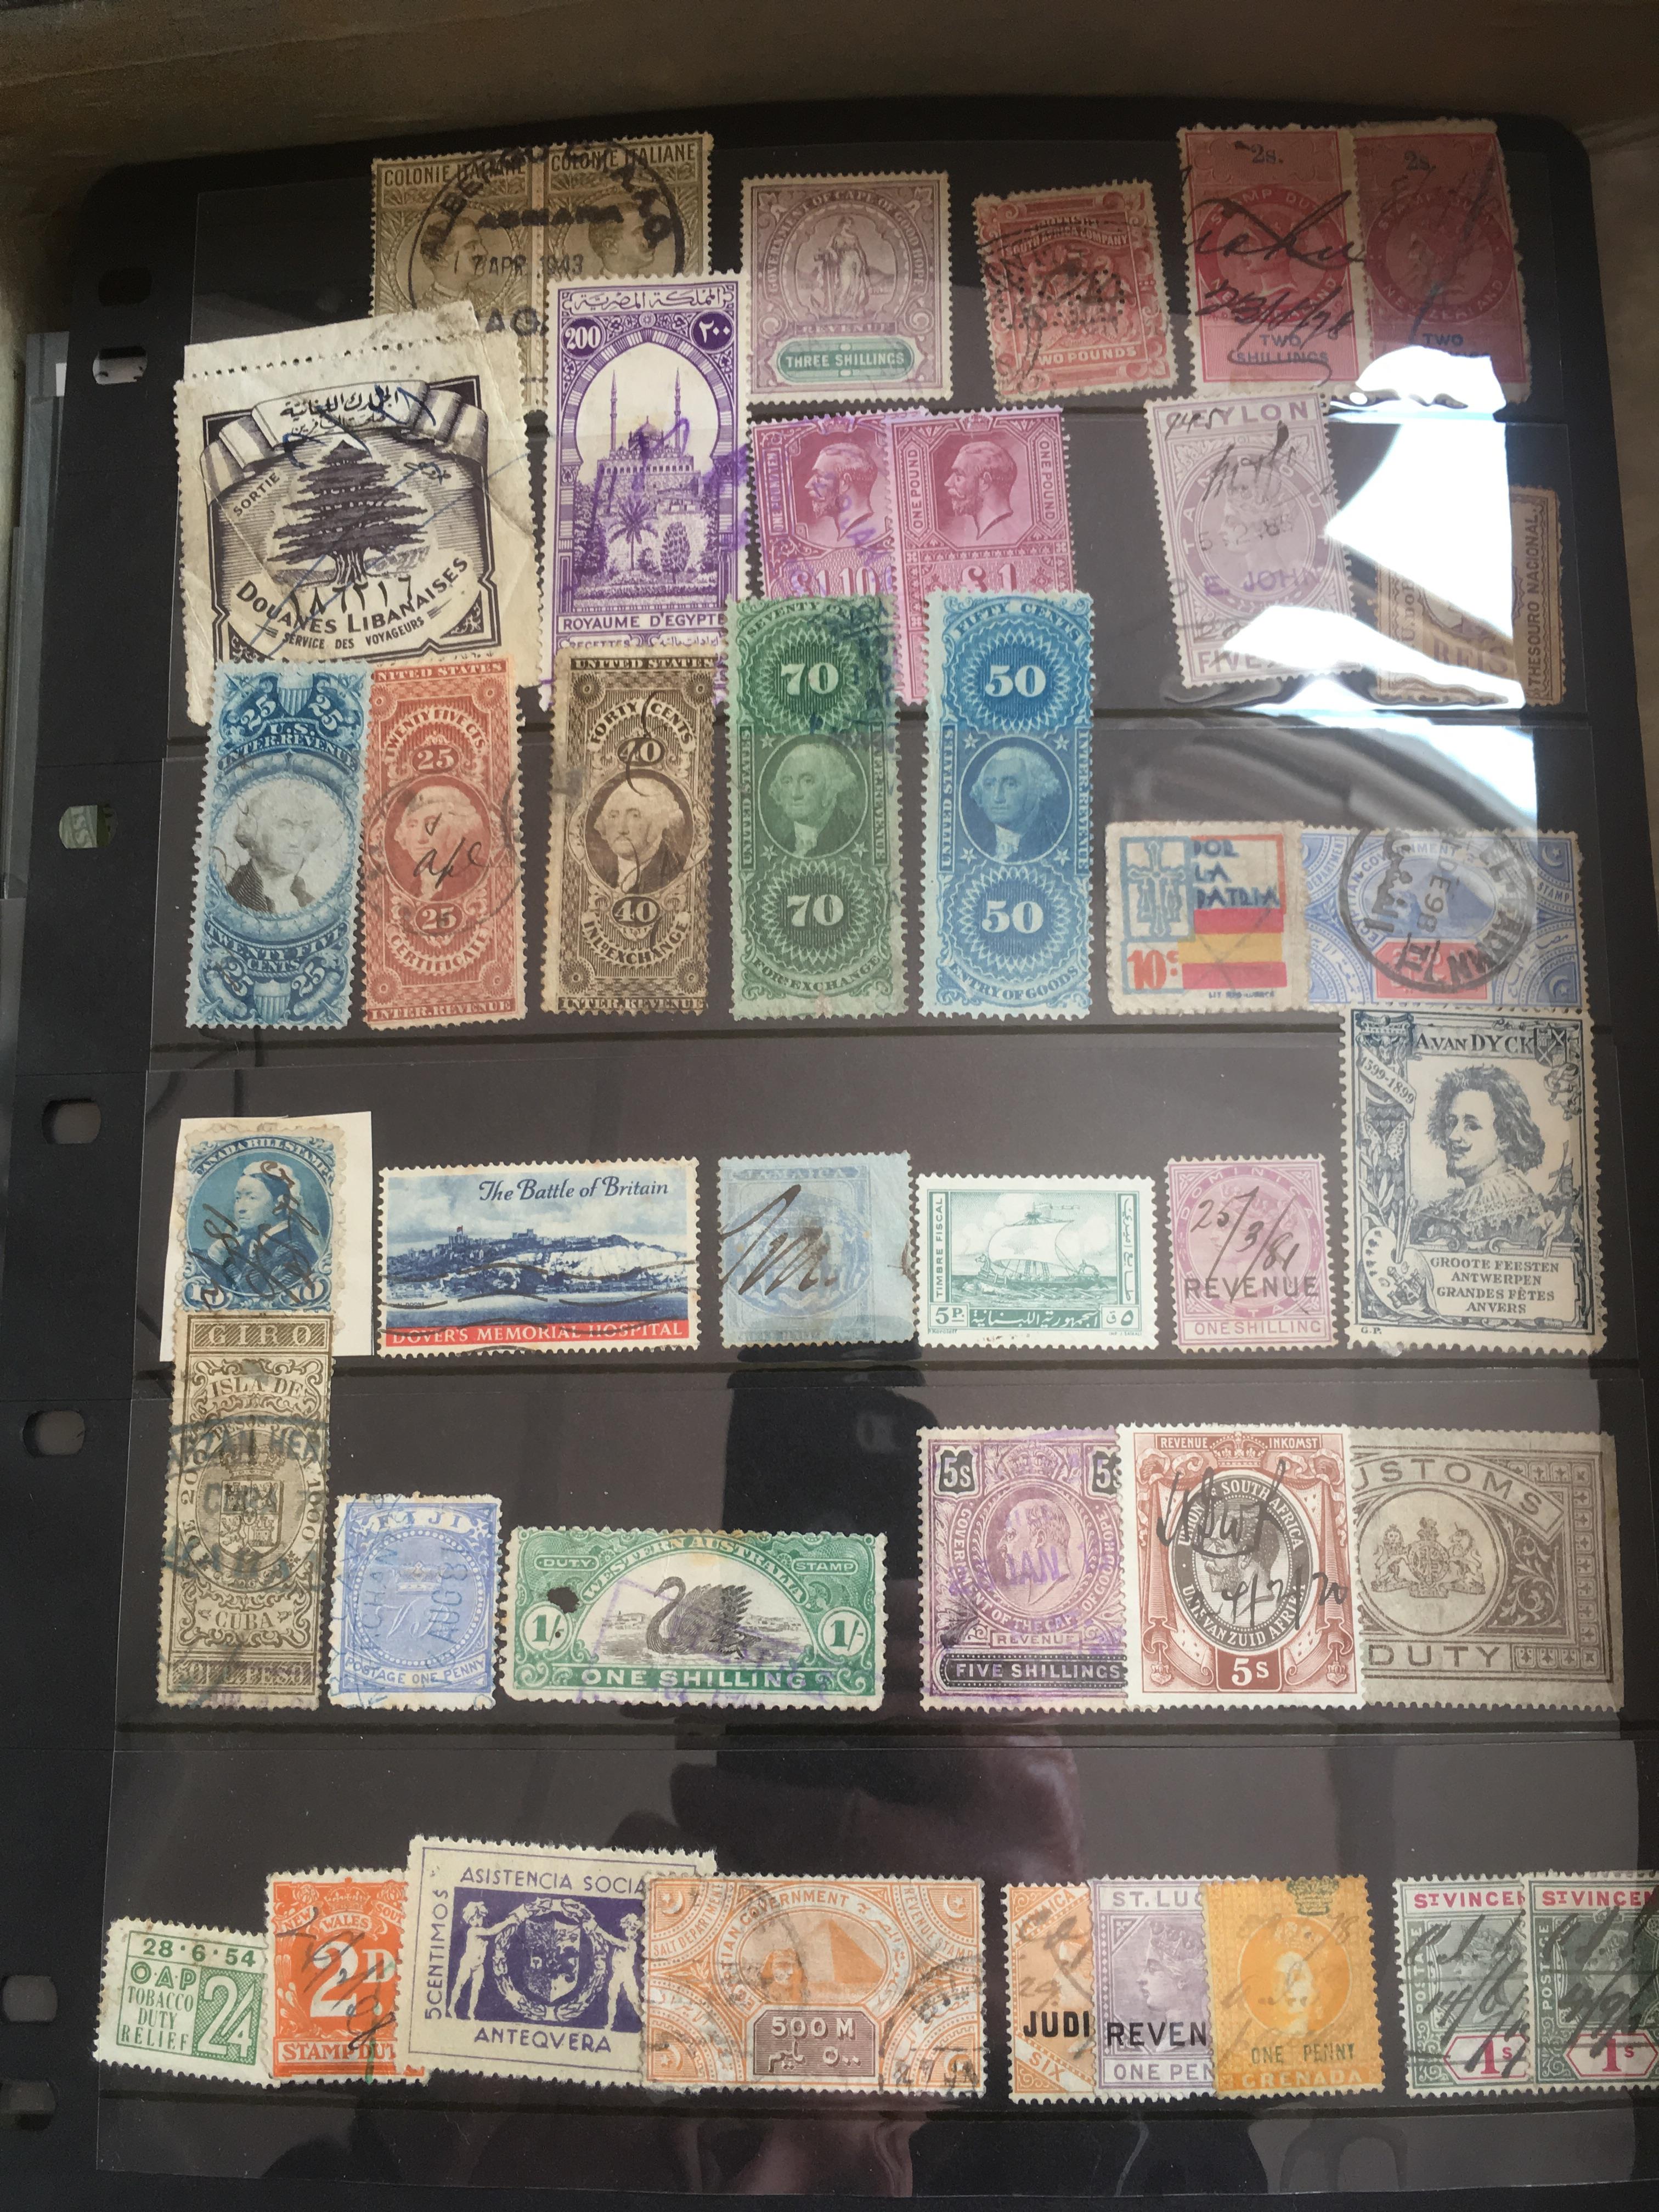 FILE BOX WITH AN ECLECTIC MIX REVENUES, CINDERELLAS, FORGERIES, LOCALS, ETC. - Image 4 of 12